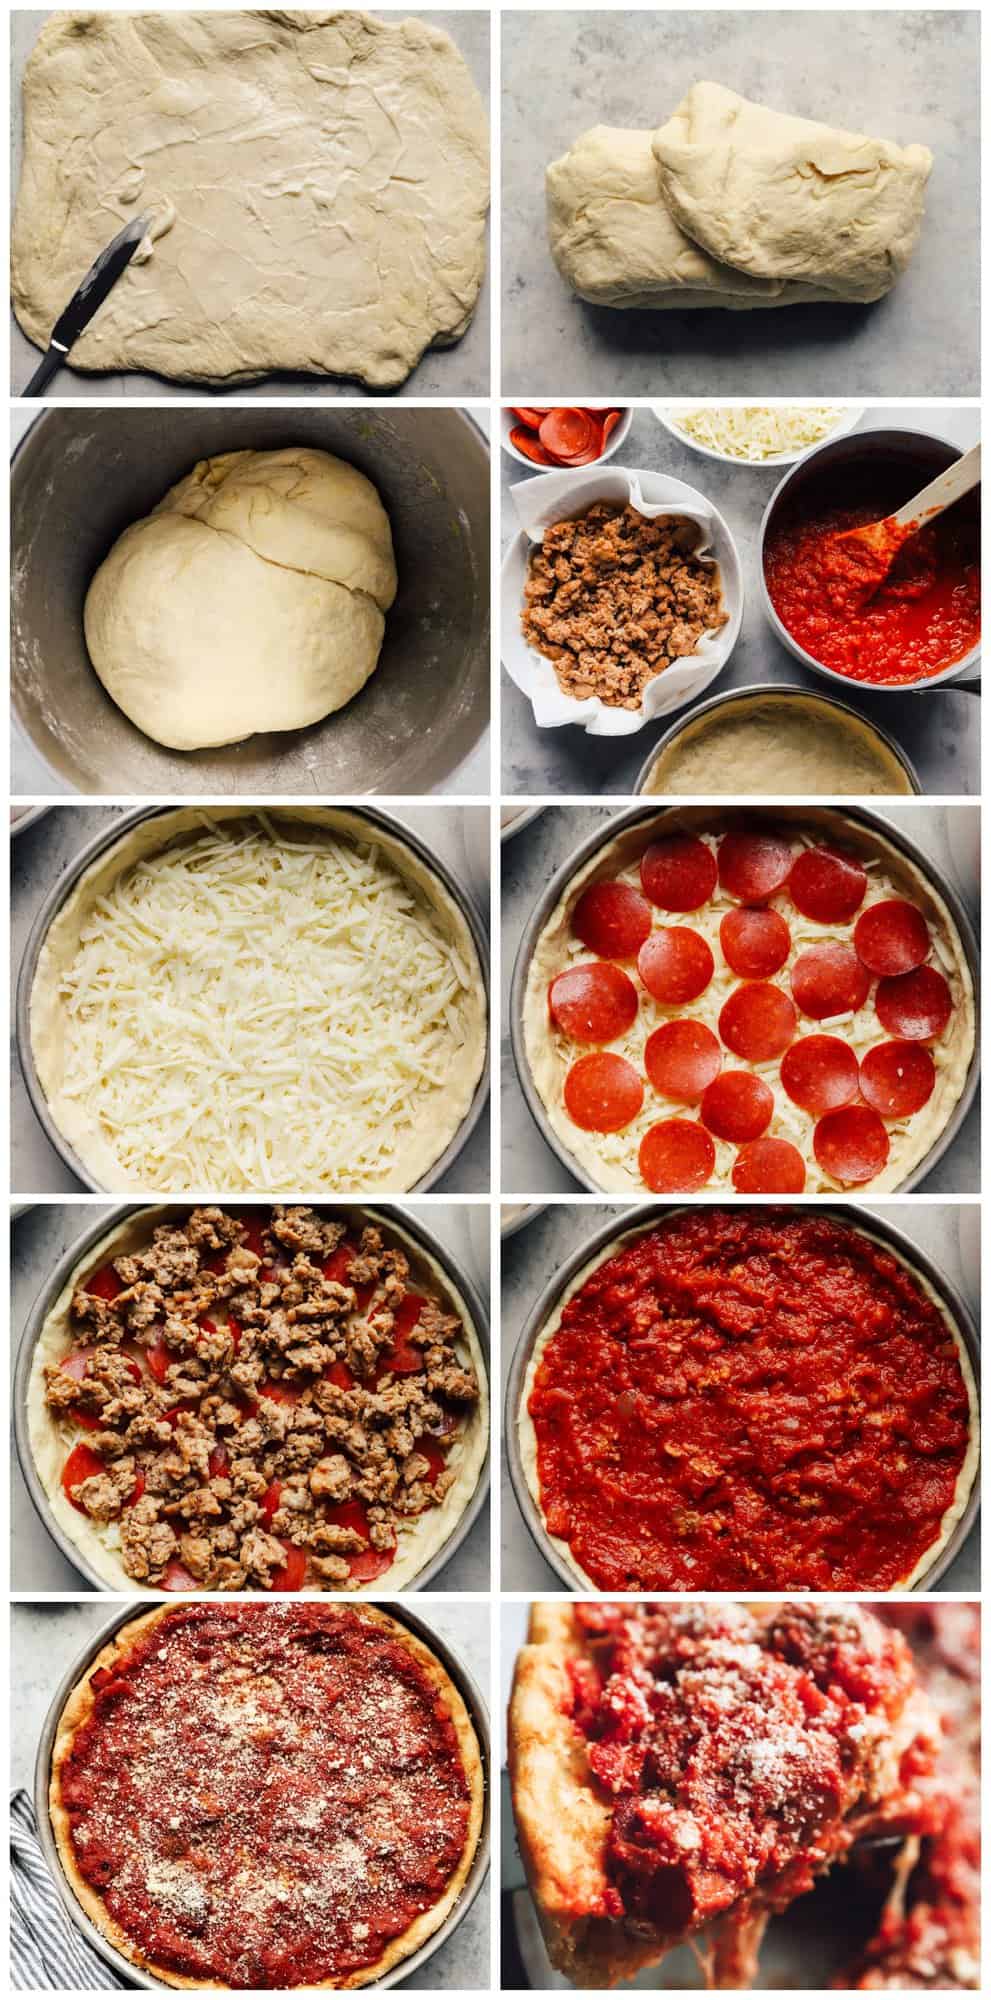 https://www.thecookierookie.com/wp-content/uploads/2022/12/step-by-step-photos-for-how-to-make-chicago-style-deep-dish.jpg